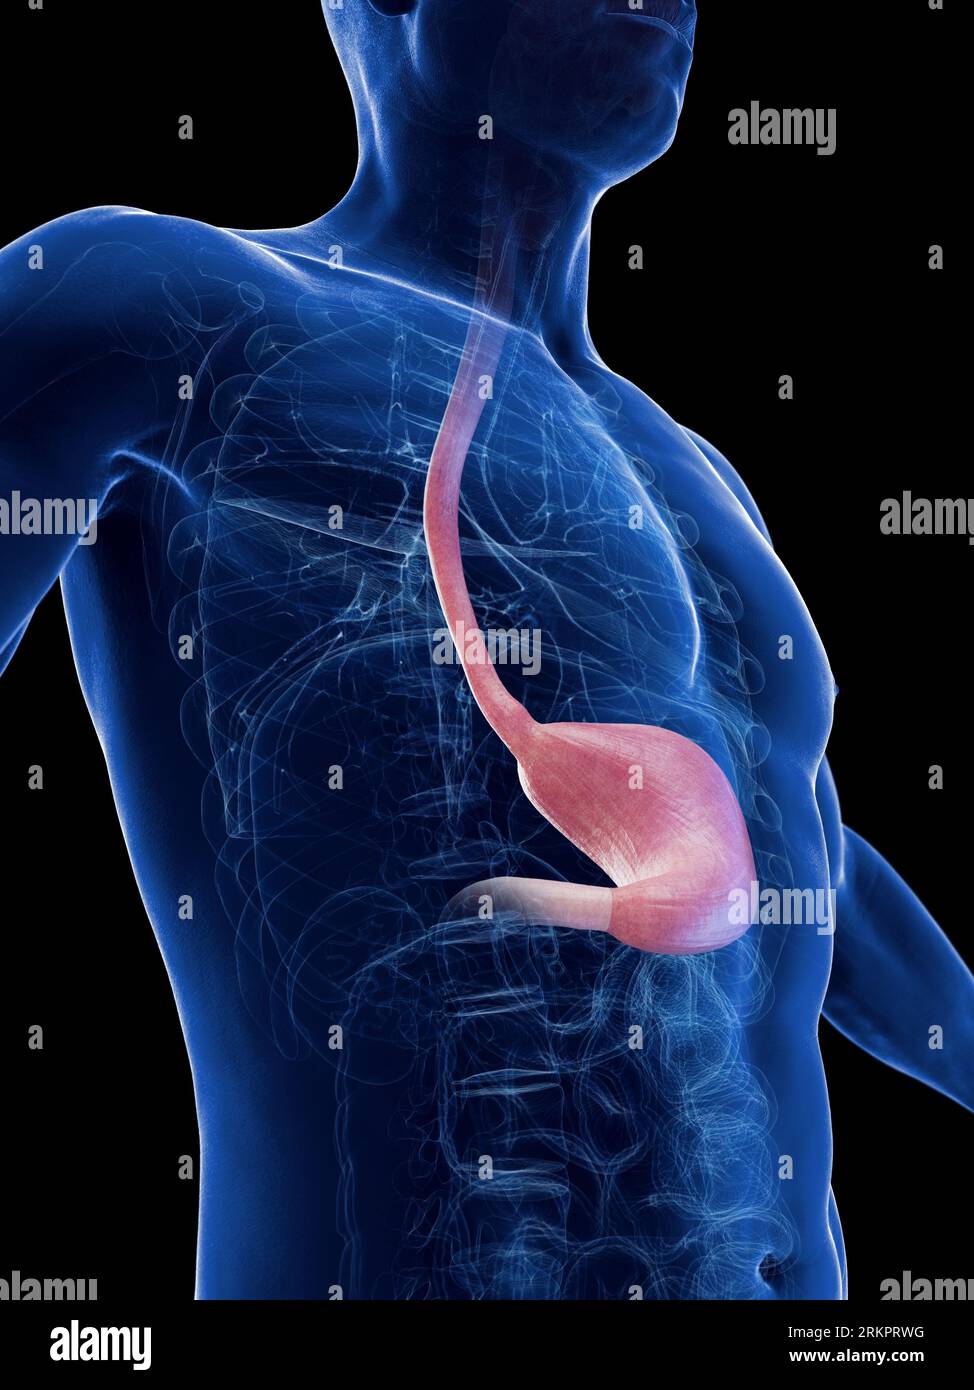 Stomach and oesophagus, illustration Stock Photo - Alamy